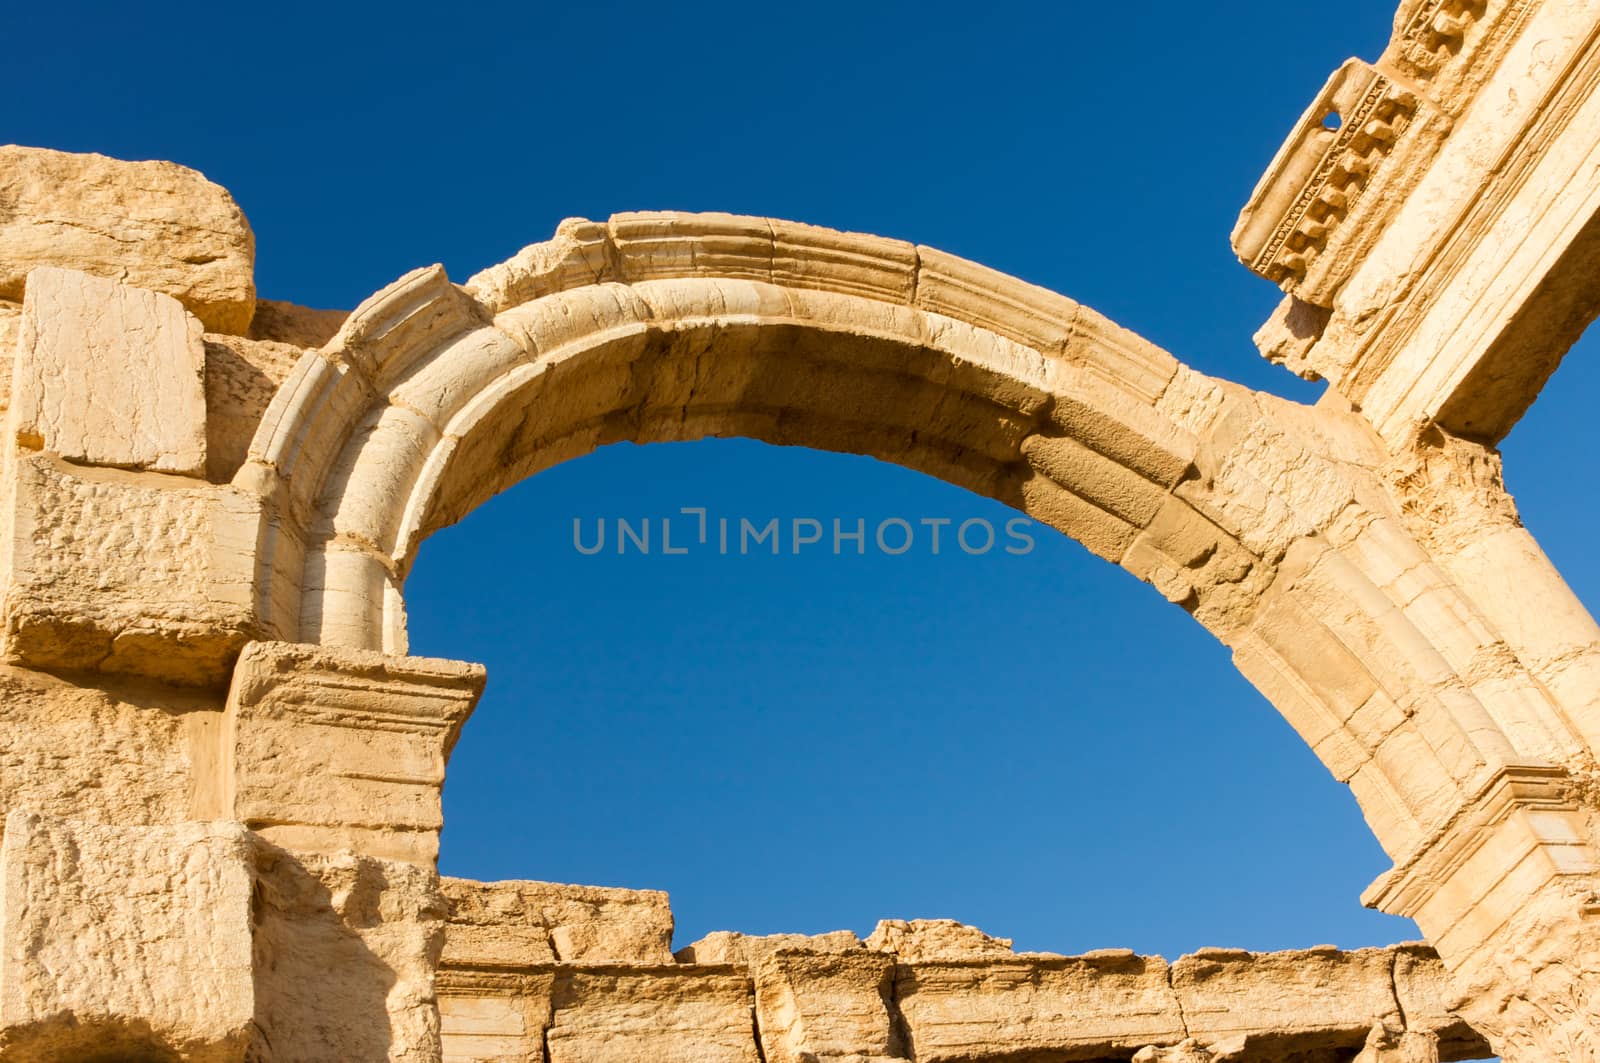 Palmyre Syria 2009 This ancient site has many Roman ruins, the arch of triumph shot in late afternoon sun with deep blue sky . High quality photo